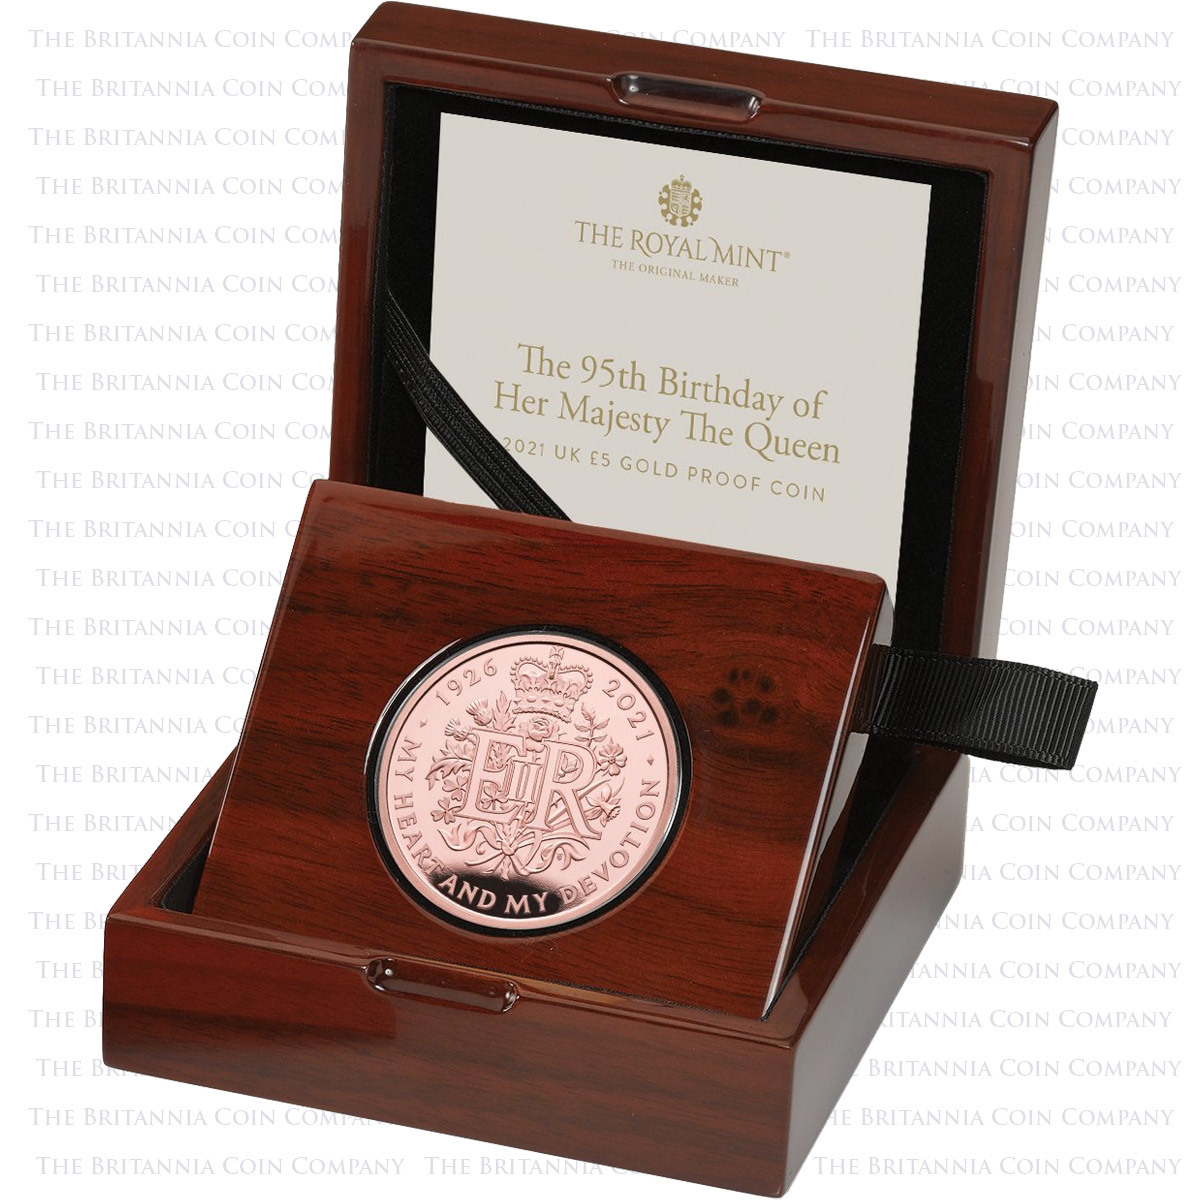 UK2195GP The 95th Birthday of Her Majesty the Queen : 2021 UK £5 Gold Proof